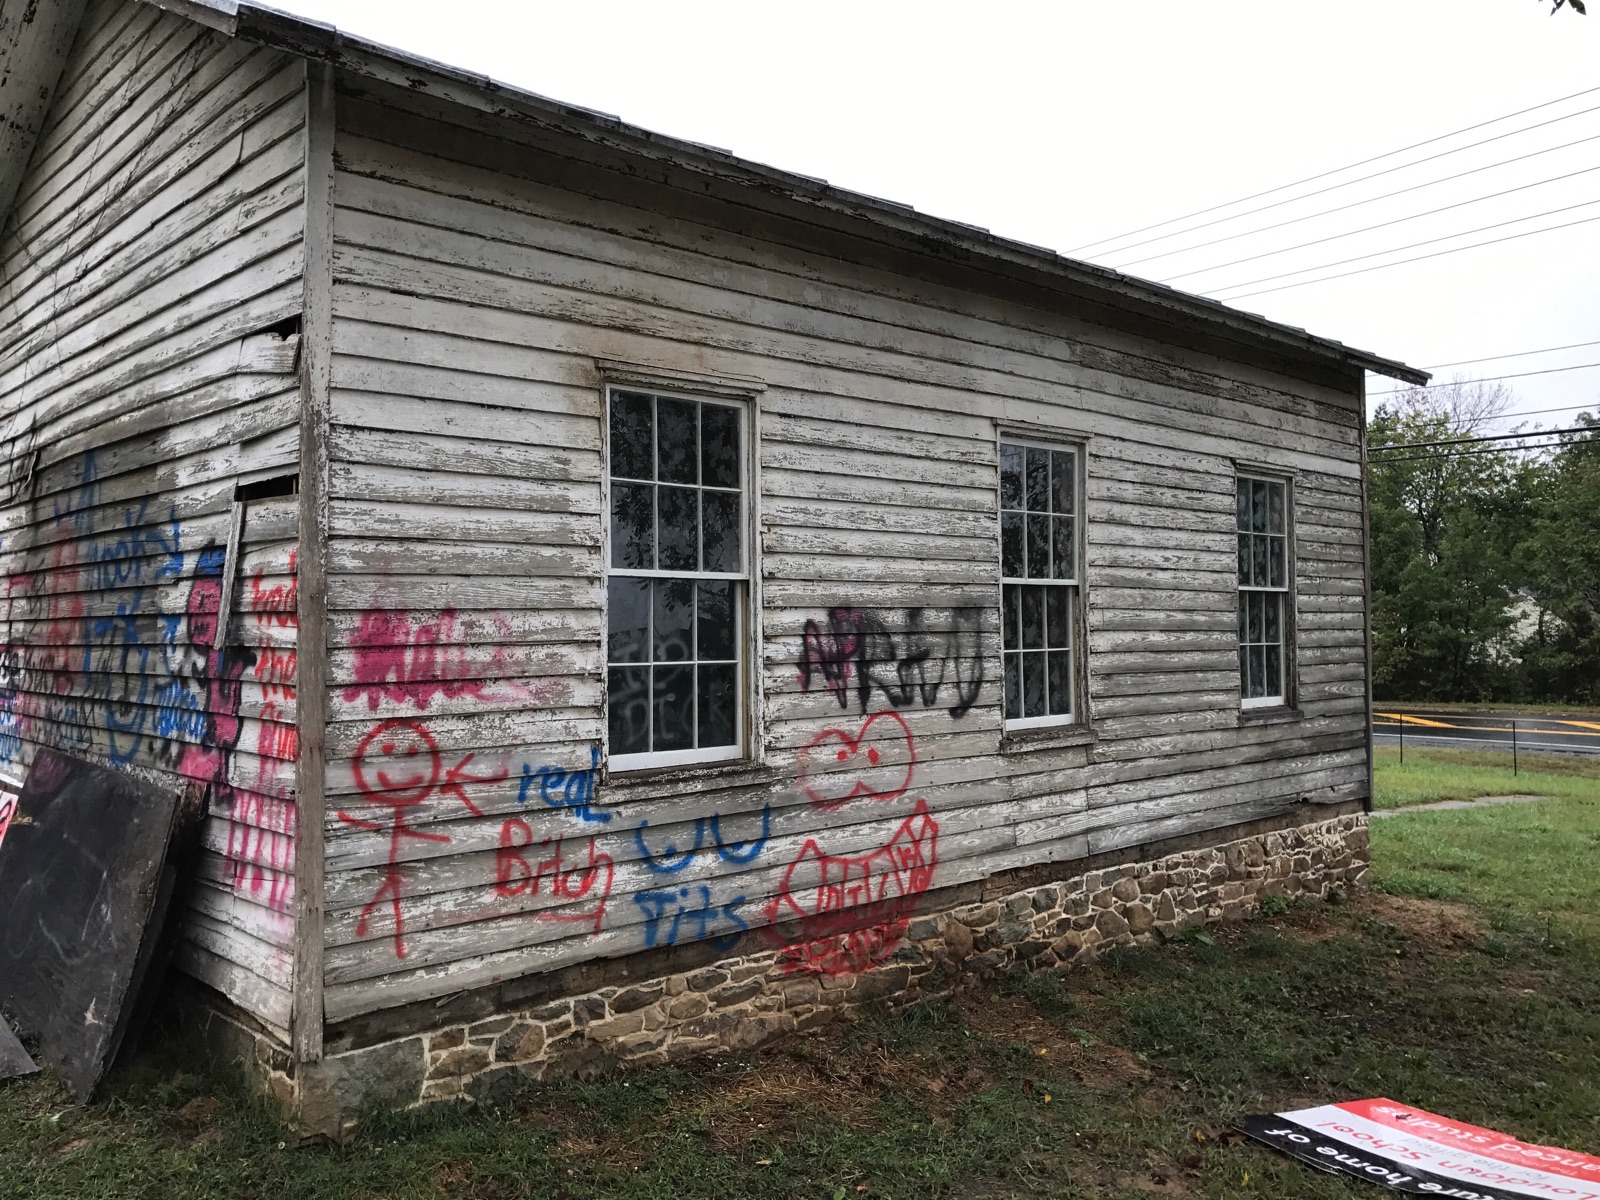 The Old Ashburn Schoolhouse in Loudoun County, Virginia was found vandalized. The Loudoun School for the Gifted was in the process of restoring the one-room schoolhouse, according to the school's principal and founder Deep Sran. (Photo Courtesy Deep Sran)